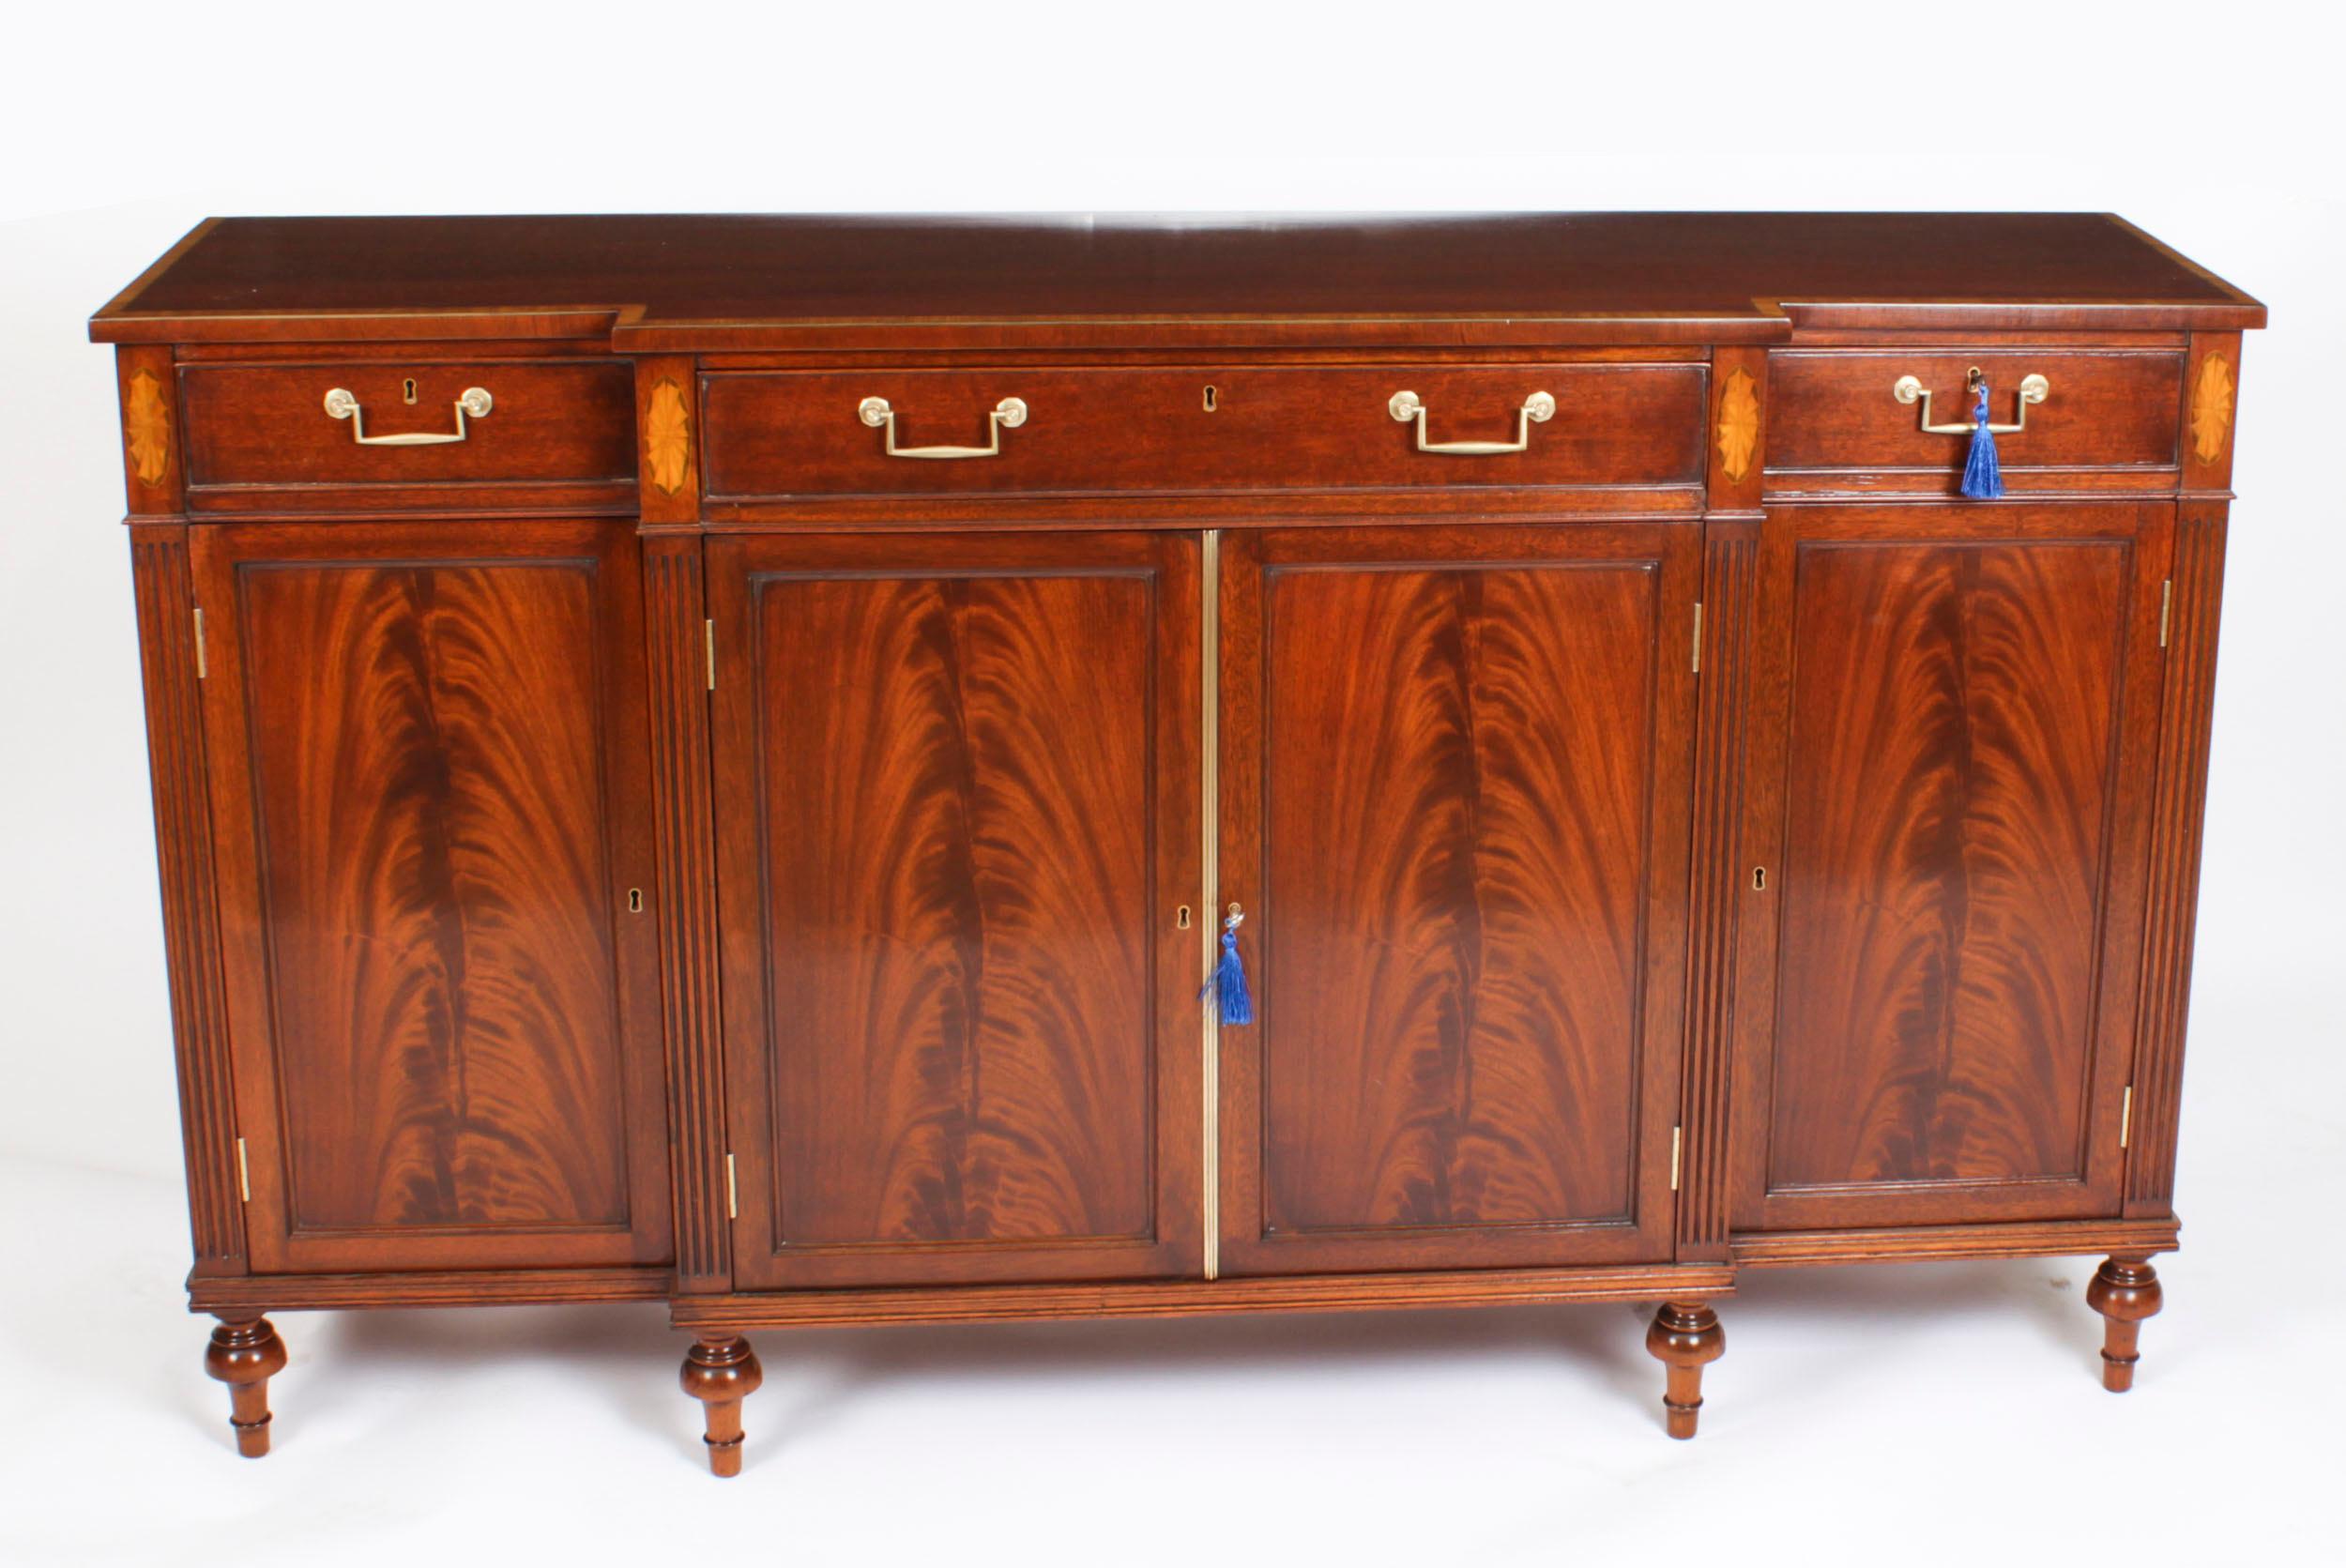 This is a fabulous vintage Regency Revival breakfront sideboard by the master cabinet maker William Tillman, circa 1980 in date.

It is made of stunning flame mahogany crossbanded in satinwood, fitted with drawers and cupboards and raised on